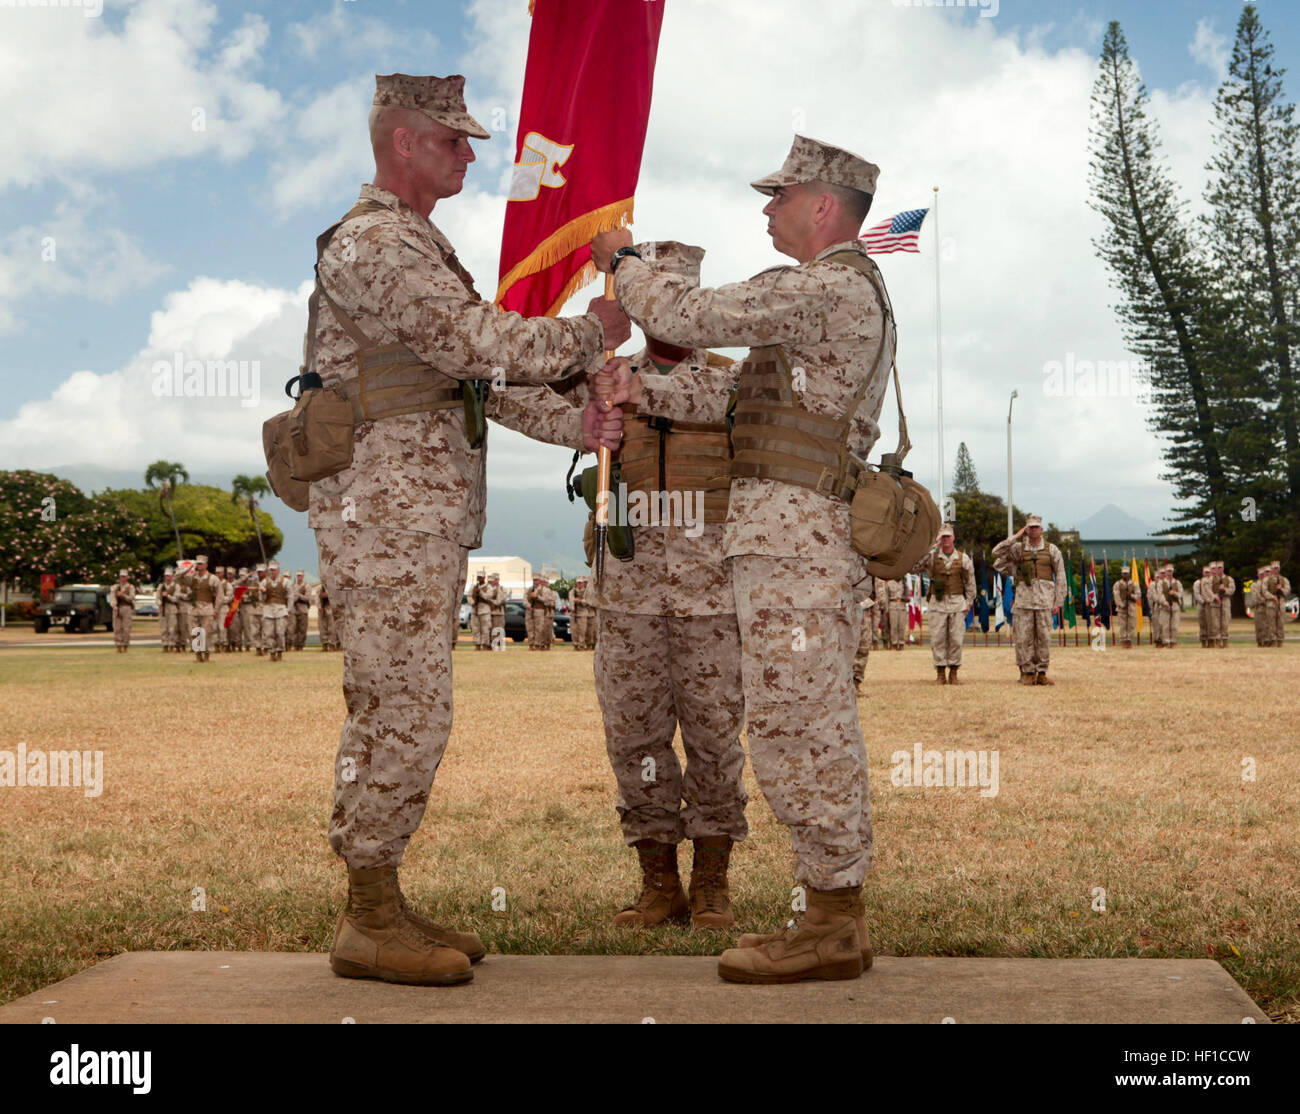 U.S. Marine Corps Colonel Timothy E. Winand (Left), Commanding Officer of Third Marine Regiment, receives the unit colors from Colonel Nathan I. Nastase (Right), during 3rd Marine Regiment's change of command ceremony at Dewey Square, Marine Corps Base Hawaii, Kaneohe Bay on July 17th, 2013. The ceremony marked the passing of command between Colonel Nastase, former Commanding Officer of 3rd Marine Regiment and Colonel Winand. (U.S. Marine Corps photo by Private 1st Class Roberto Villa Jr./Released) Third Marine Regiment Change of Command 130717-M-BN443-013 Stock Photo